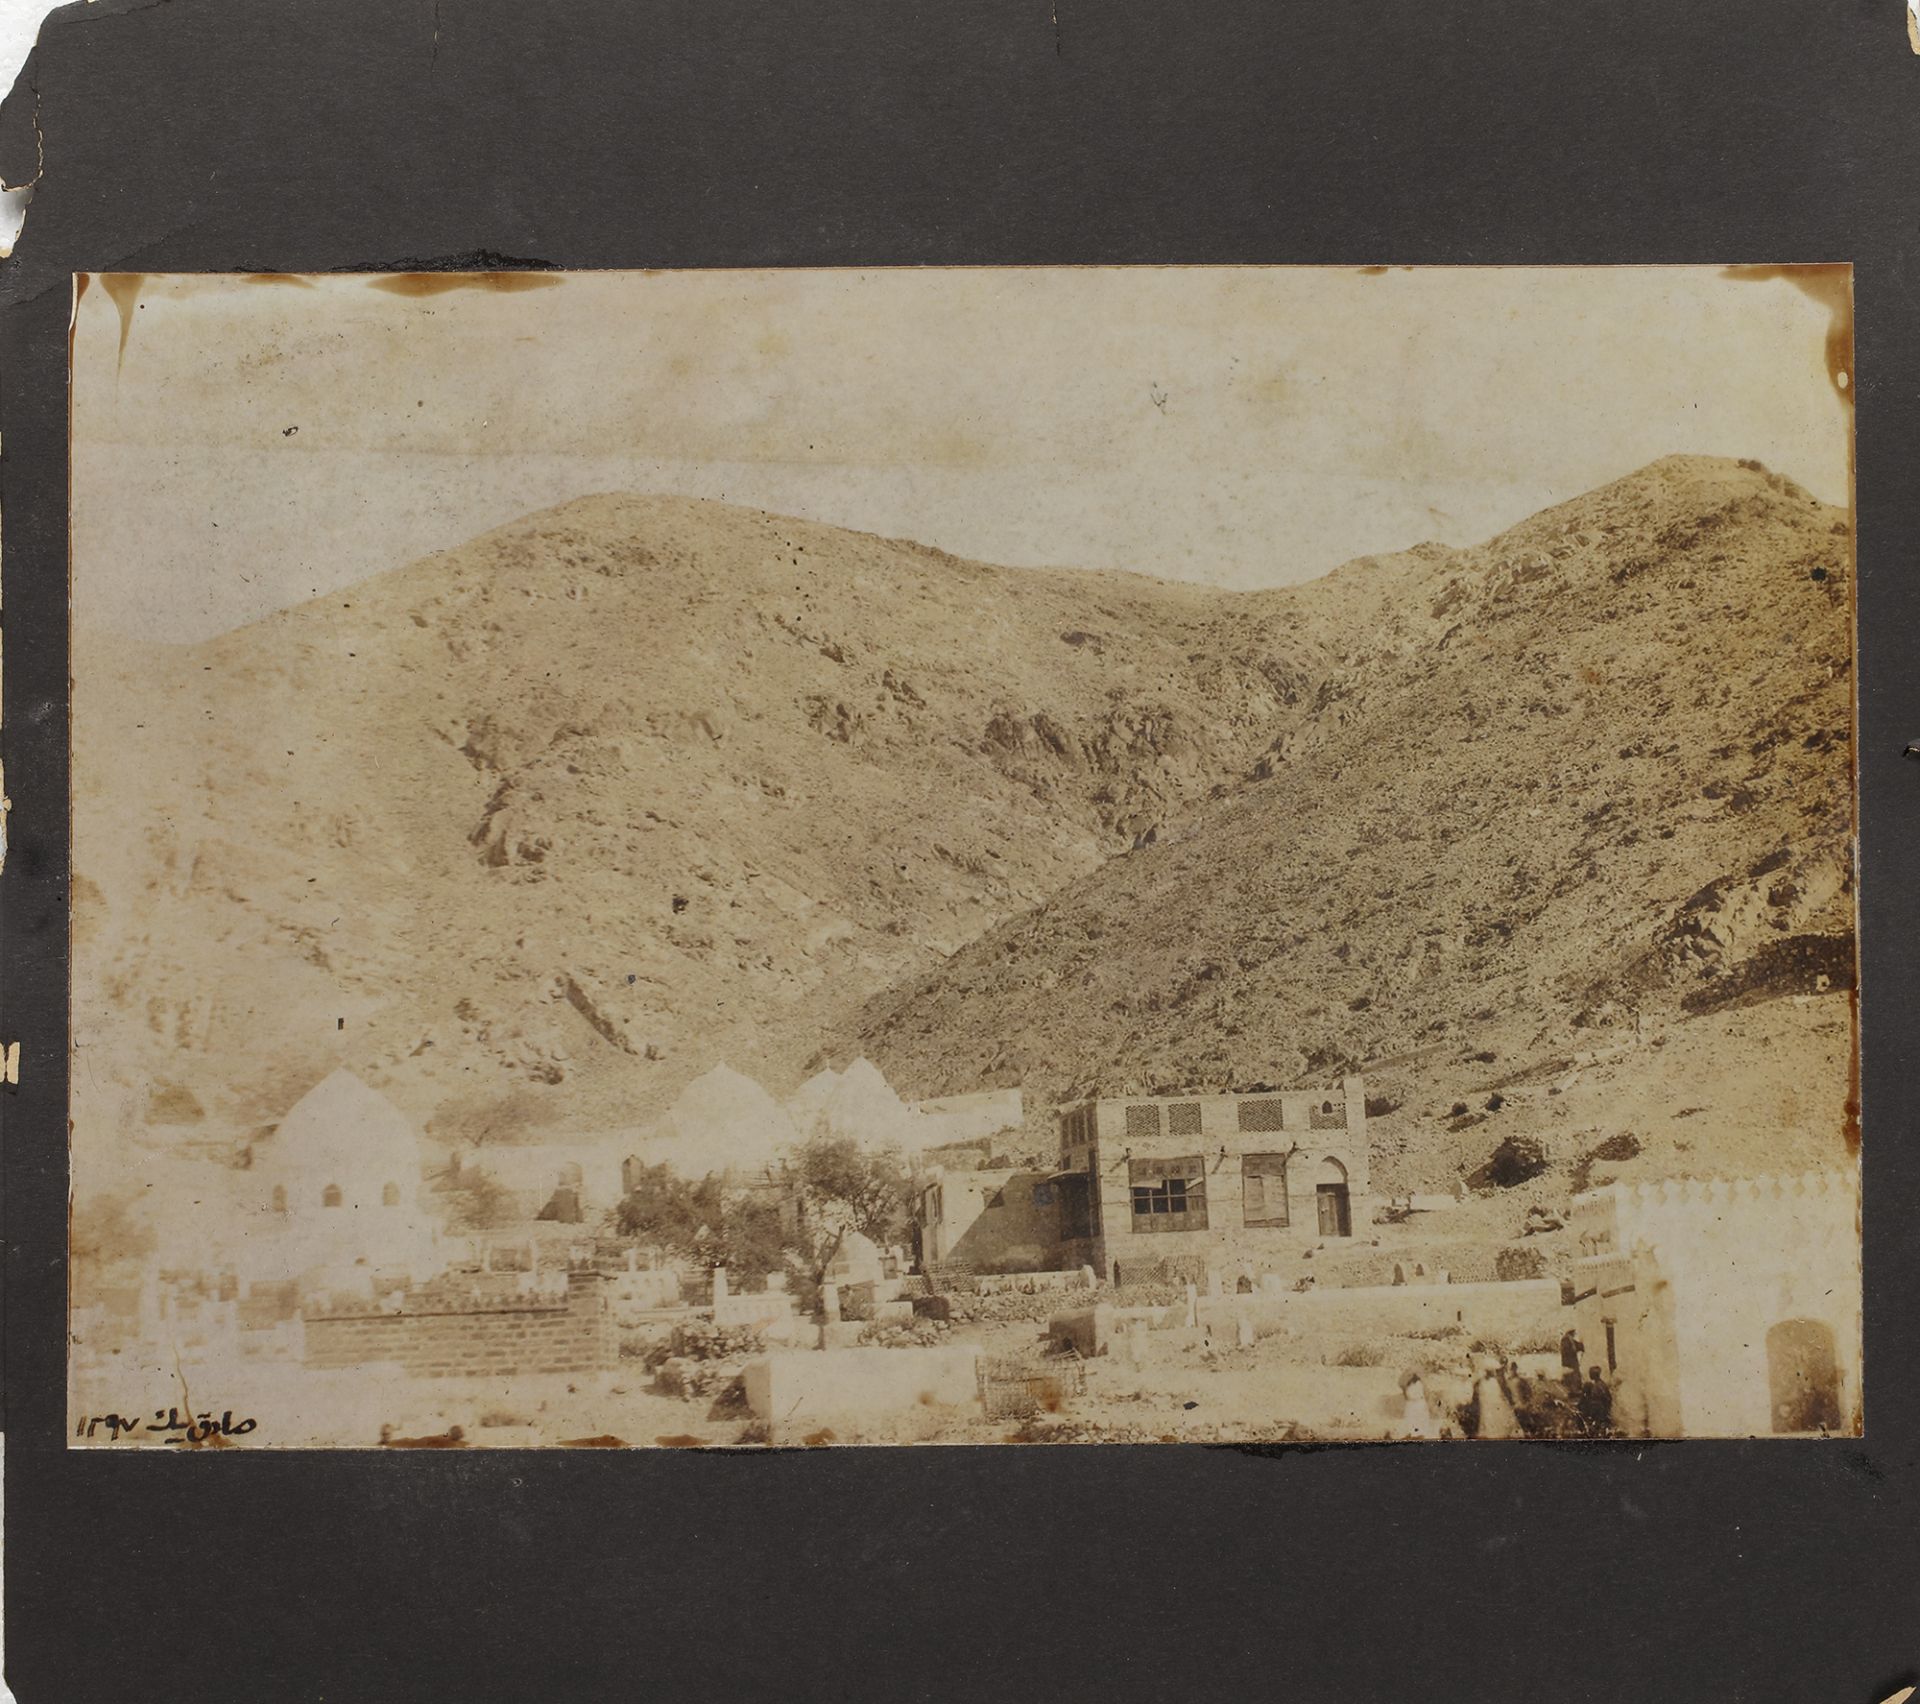 MECCA AND MEDINA, A COLLECTION OF 14 PHOTOGRAPHS DURING THE HAJJ, EARLY 20TH CENTURY - Image 4 of 15